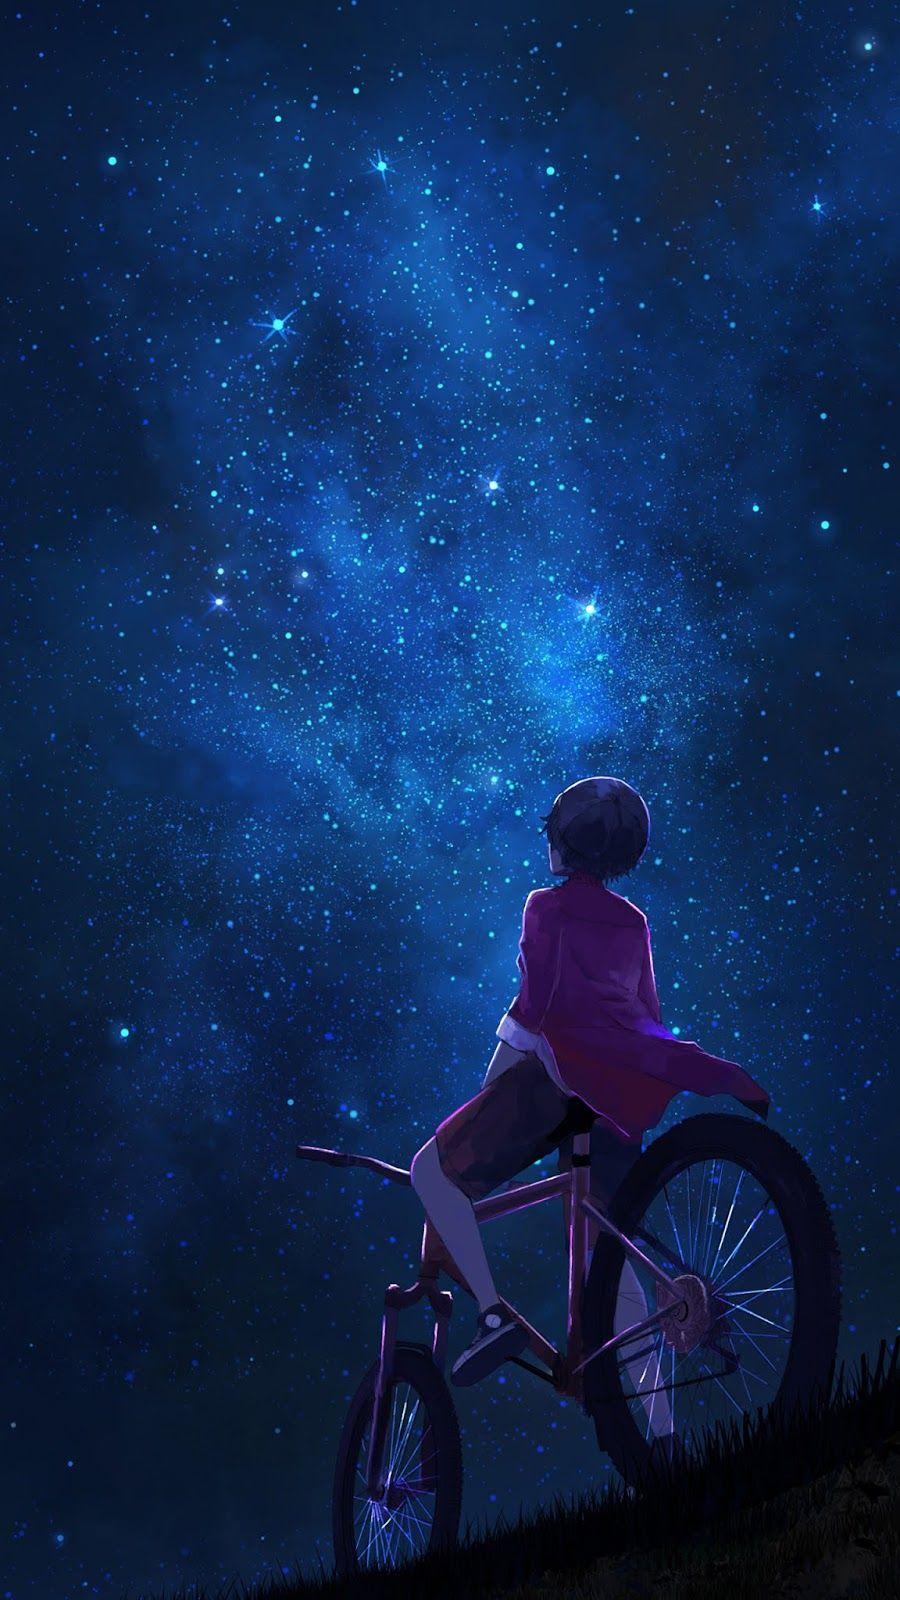 Anime Starry Sky Wallpapers